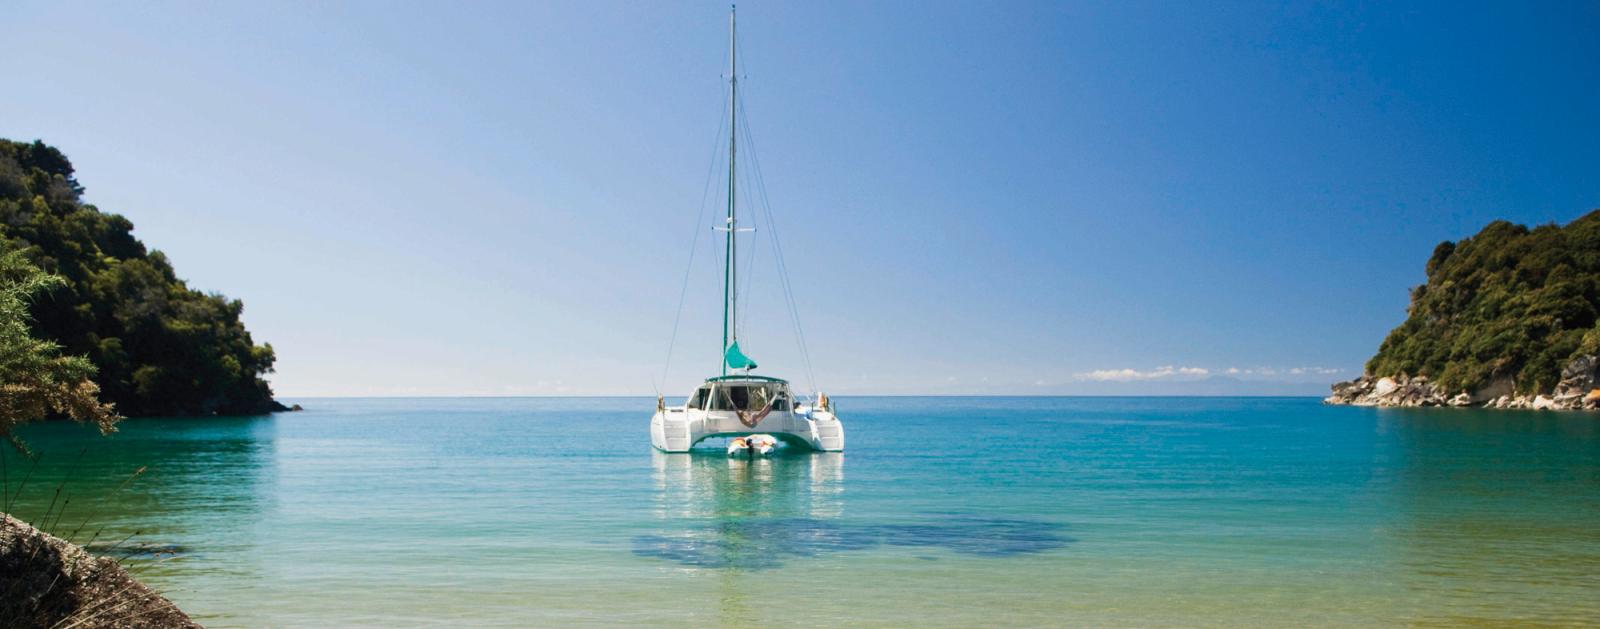 Sailing adventure in the tranquil waters of Abel Tasman National Park.